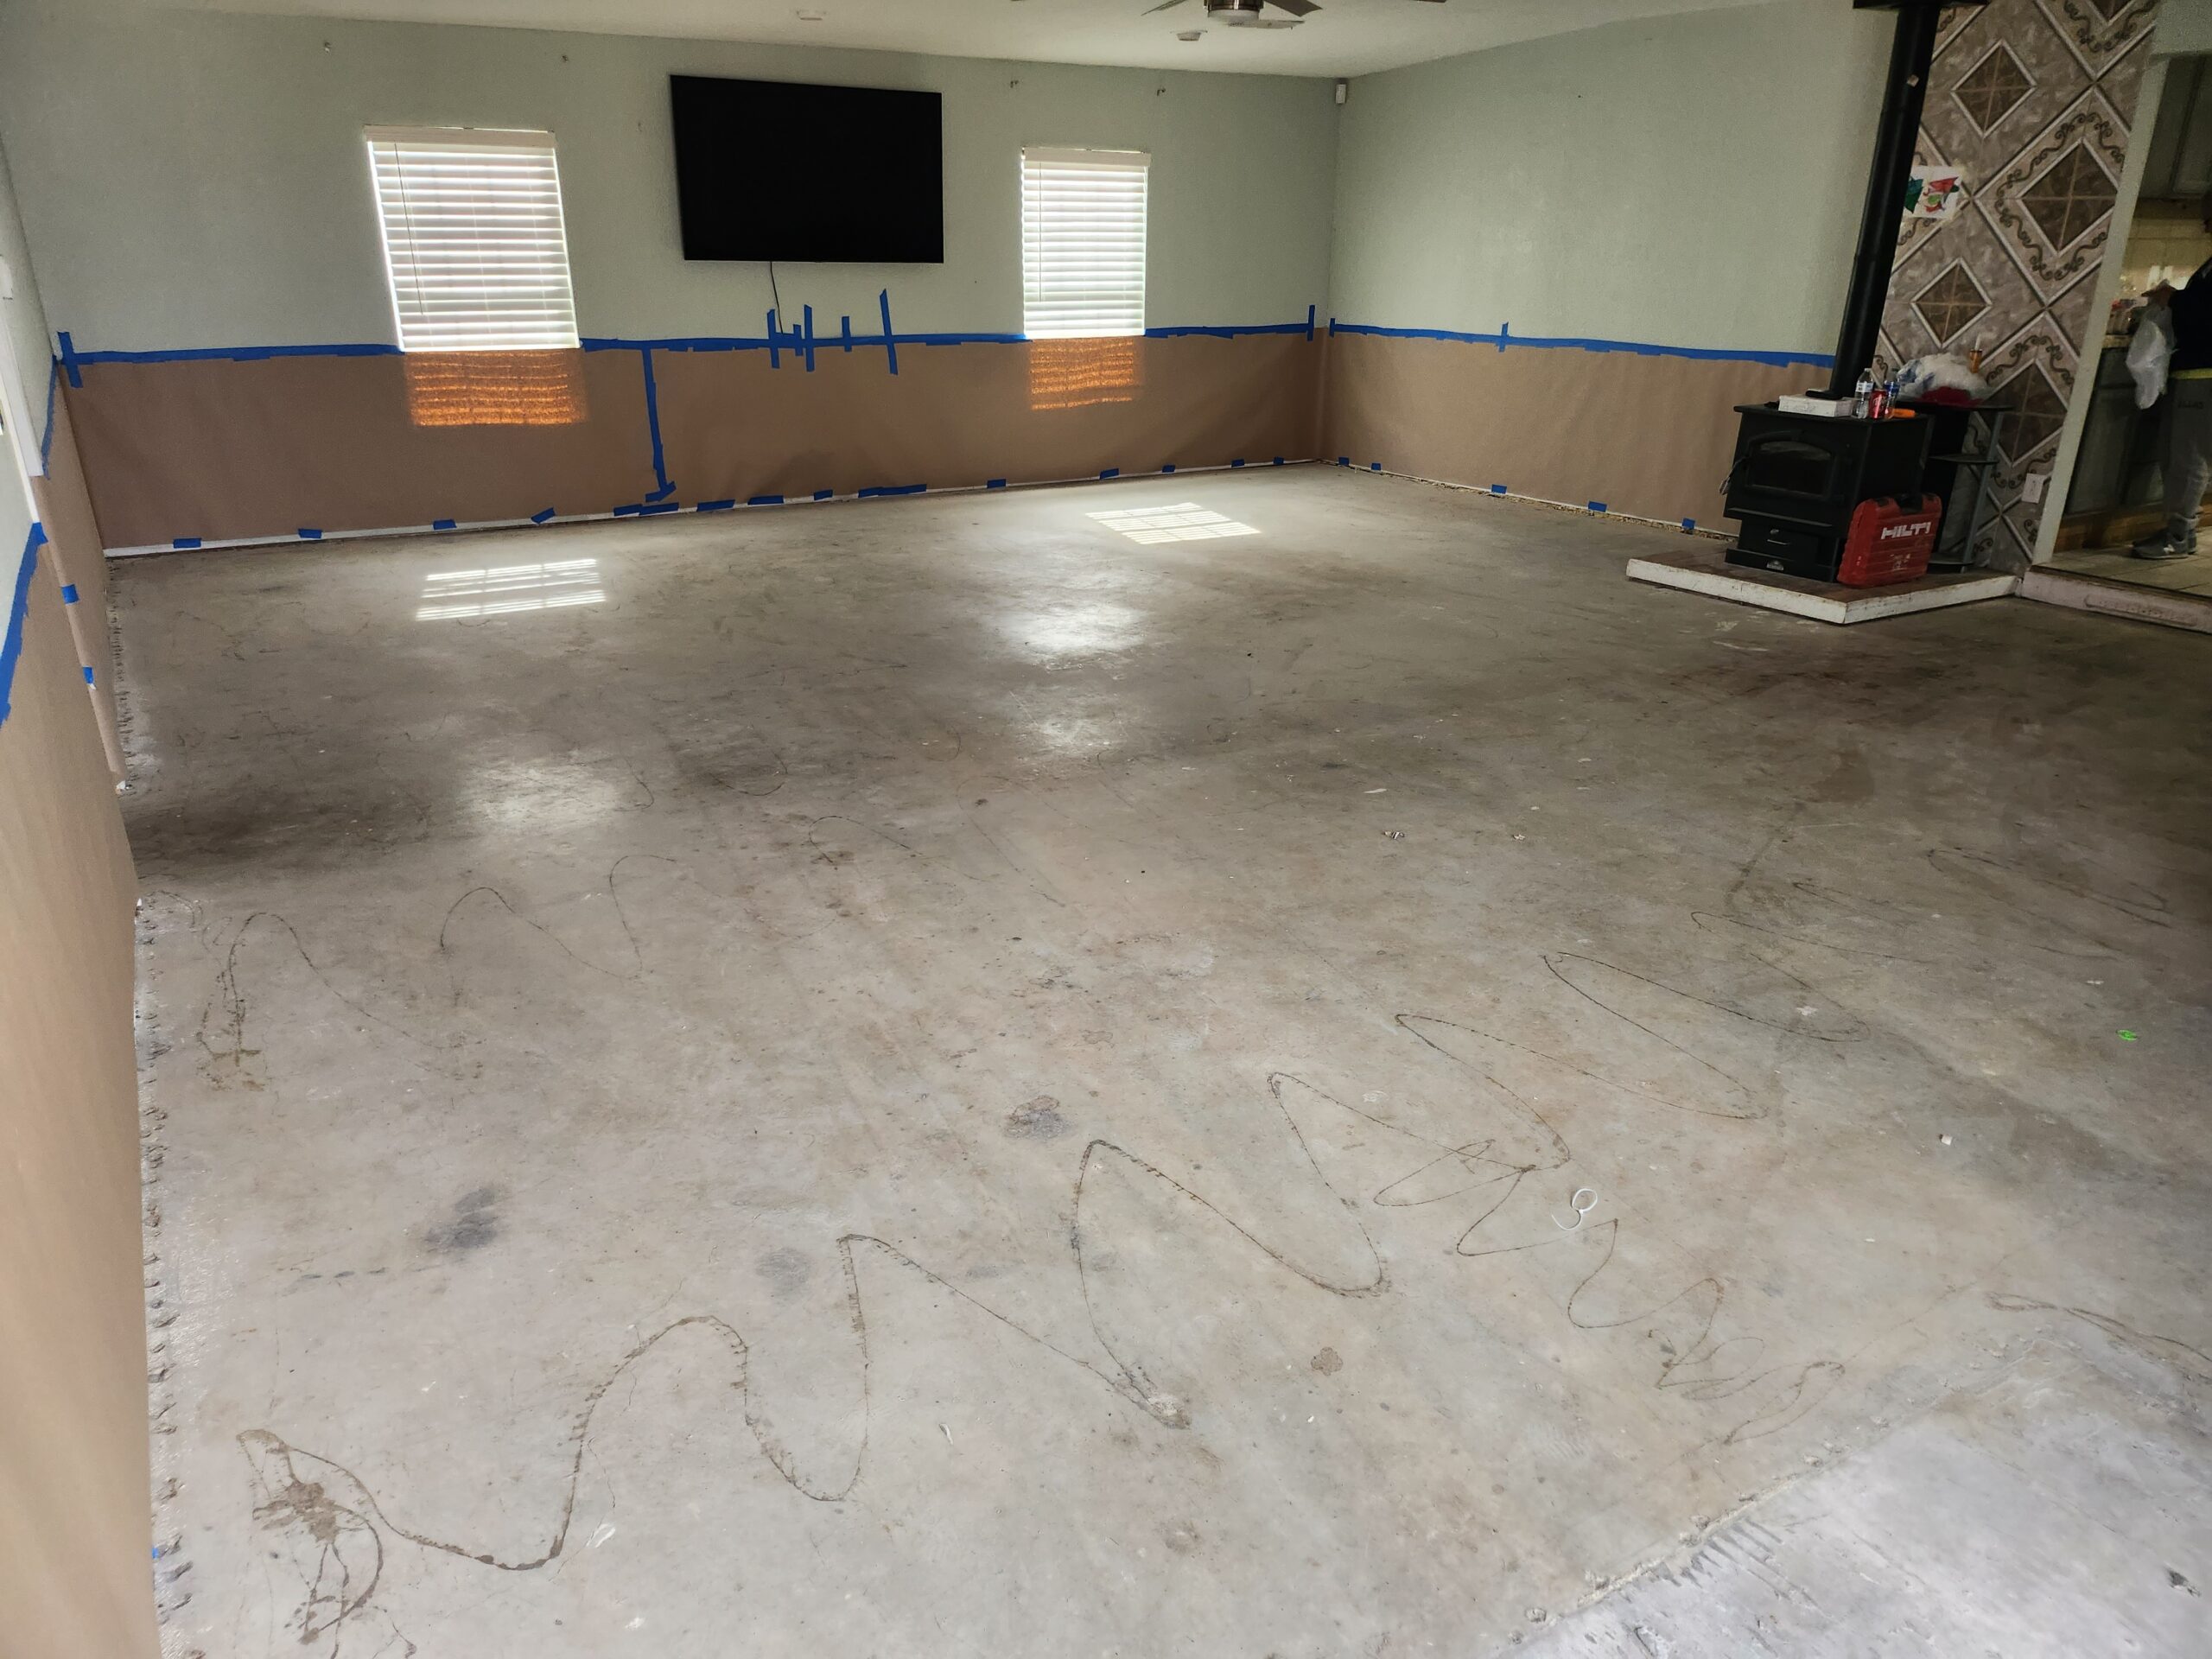 Cleaning - Concrete floor covered in residual carpet glue, creating a textured and uneven surface